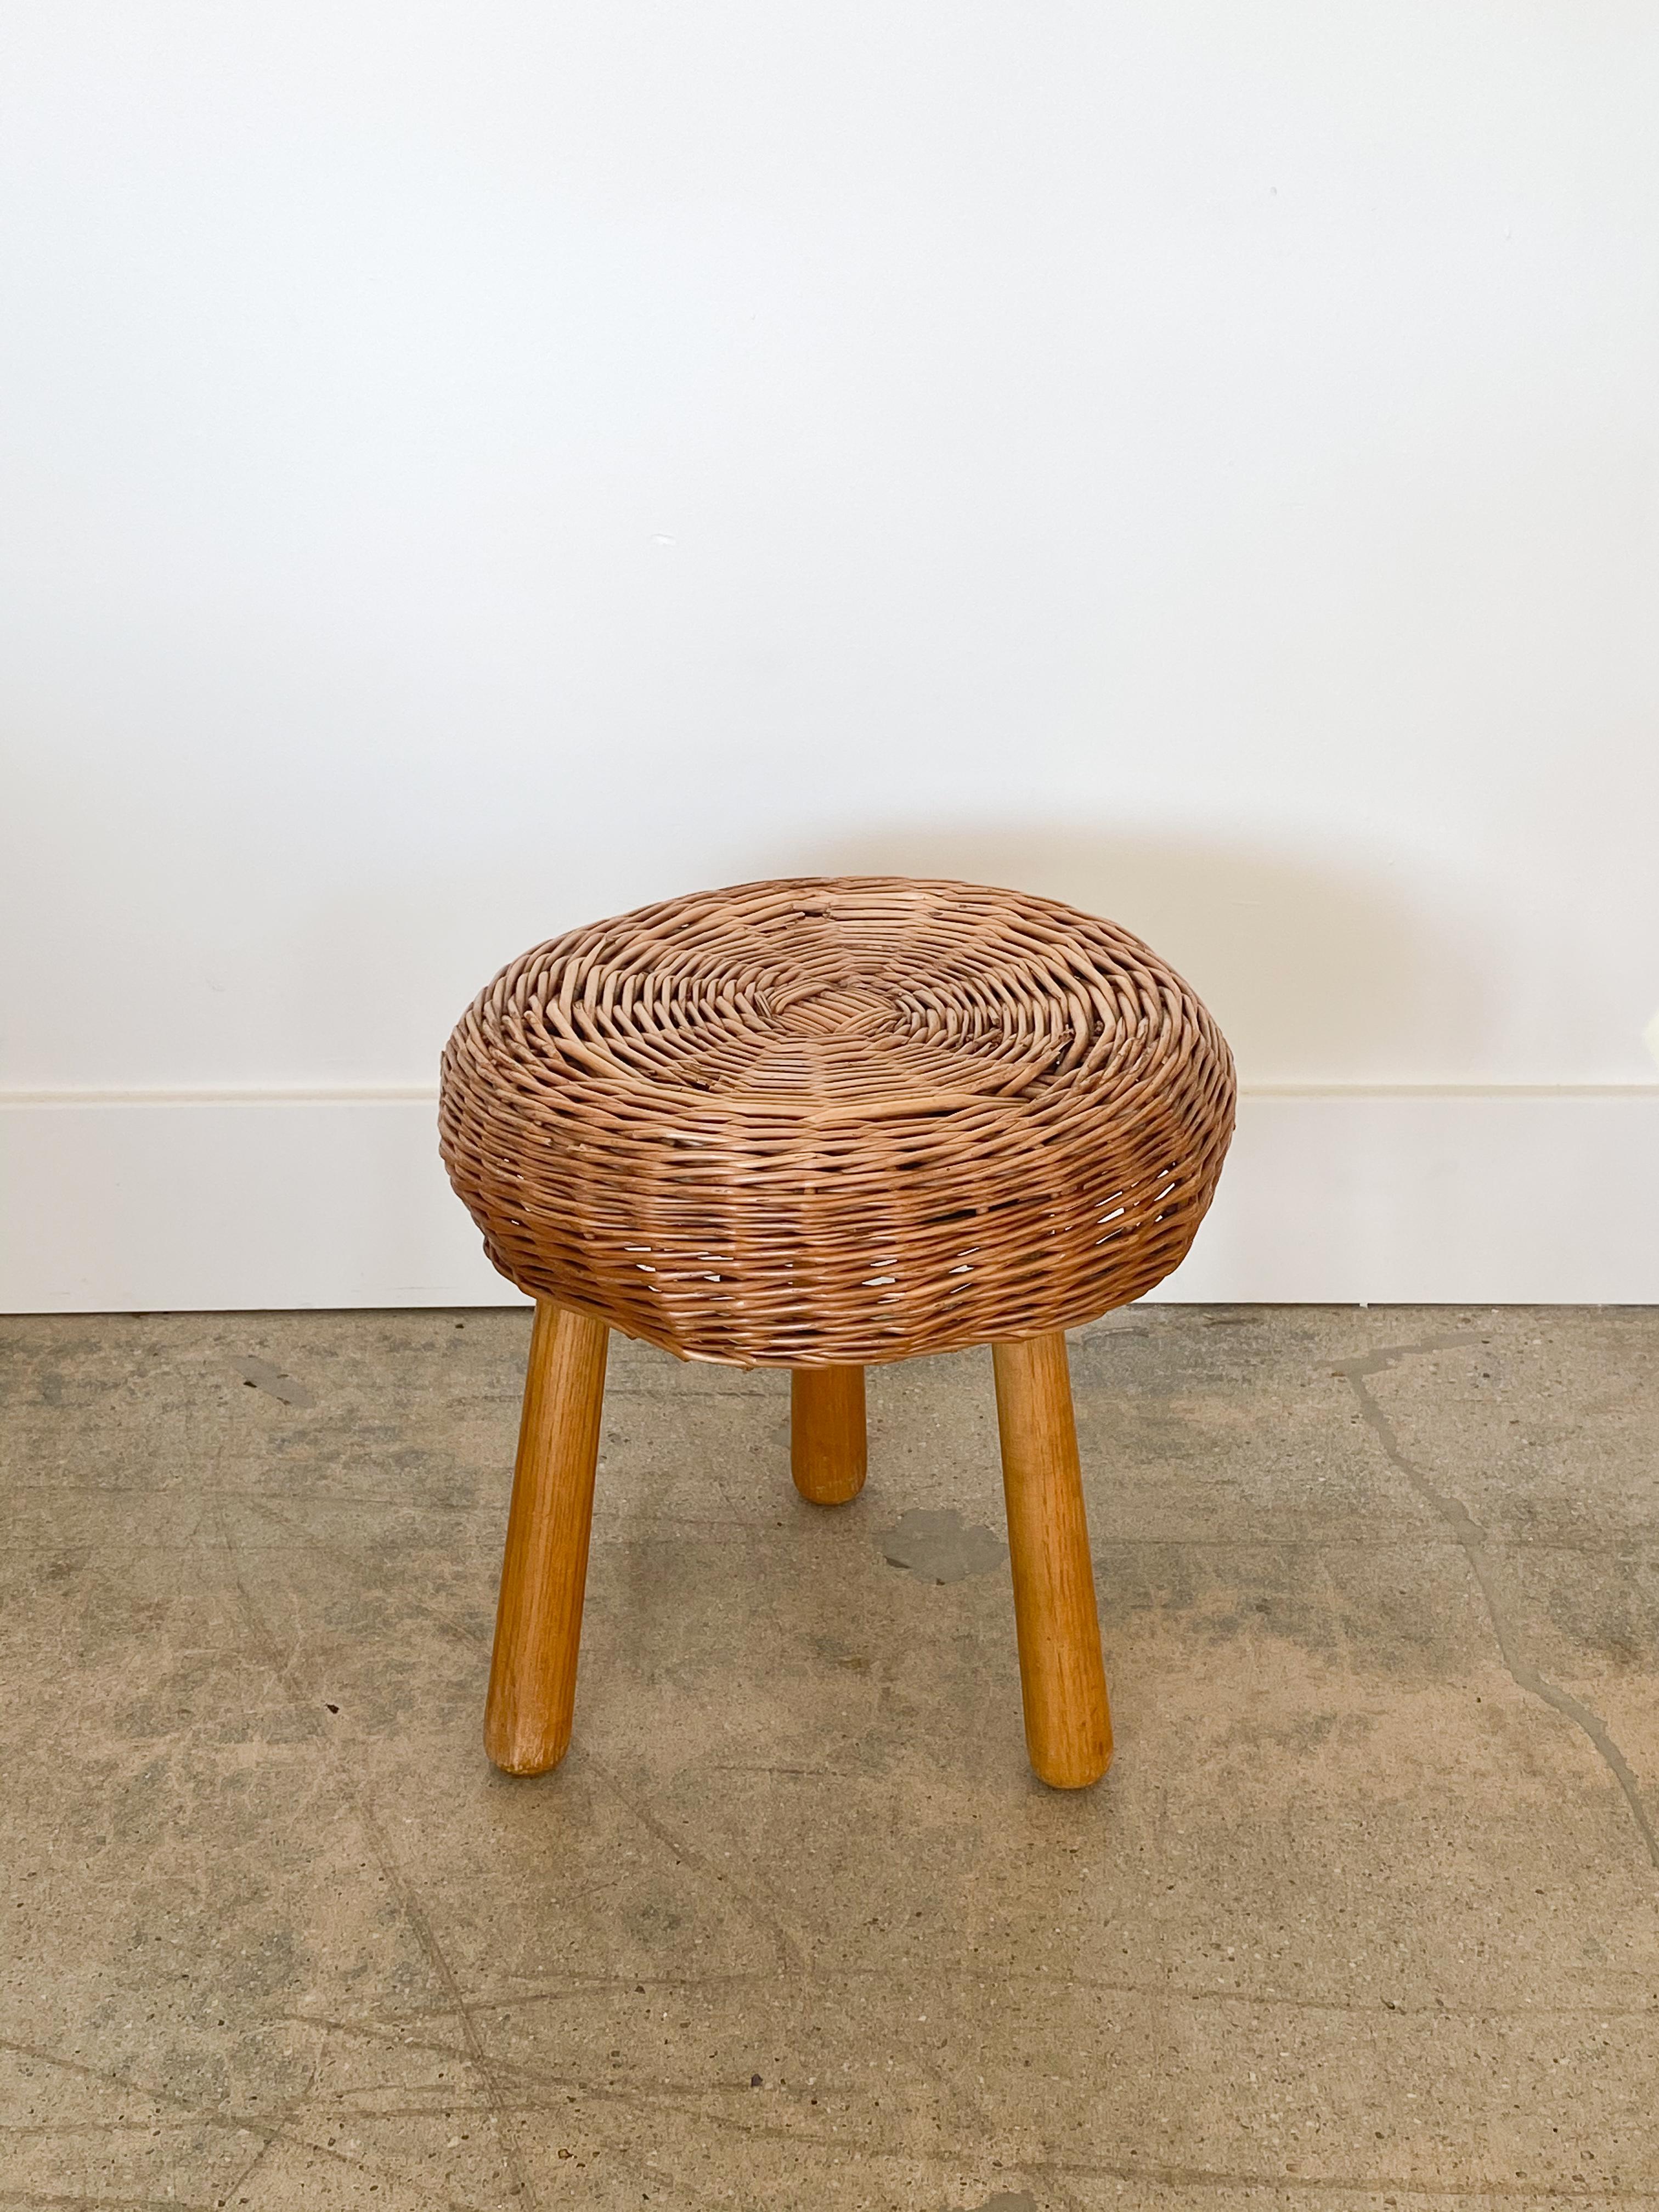 Circular wicker stool with three wood legs in the style of Tony Paul from the 1950s. All original with small pieces of wicker missing. See photos.